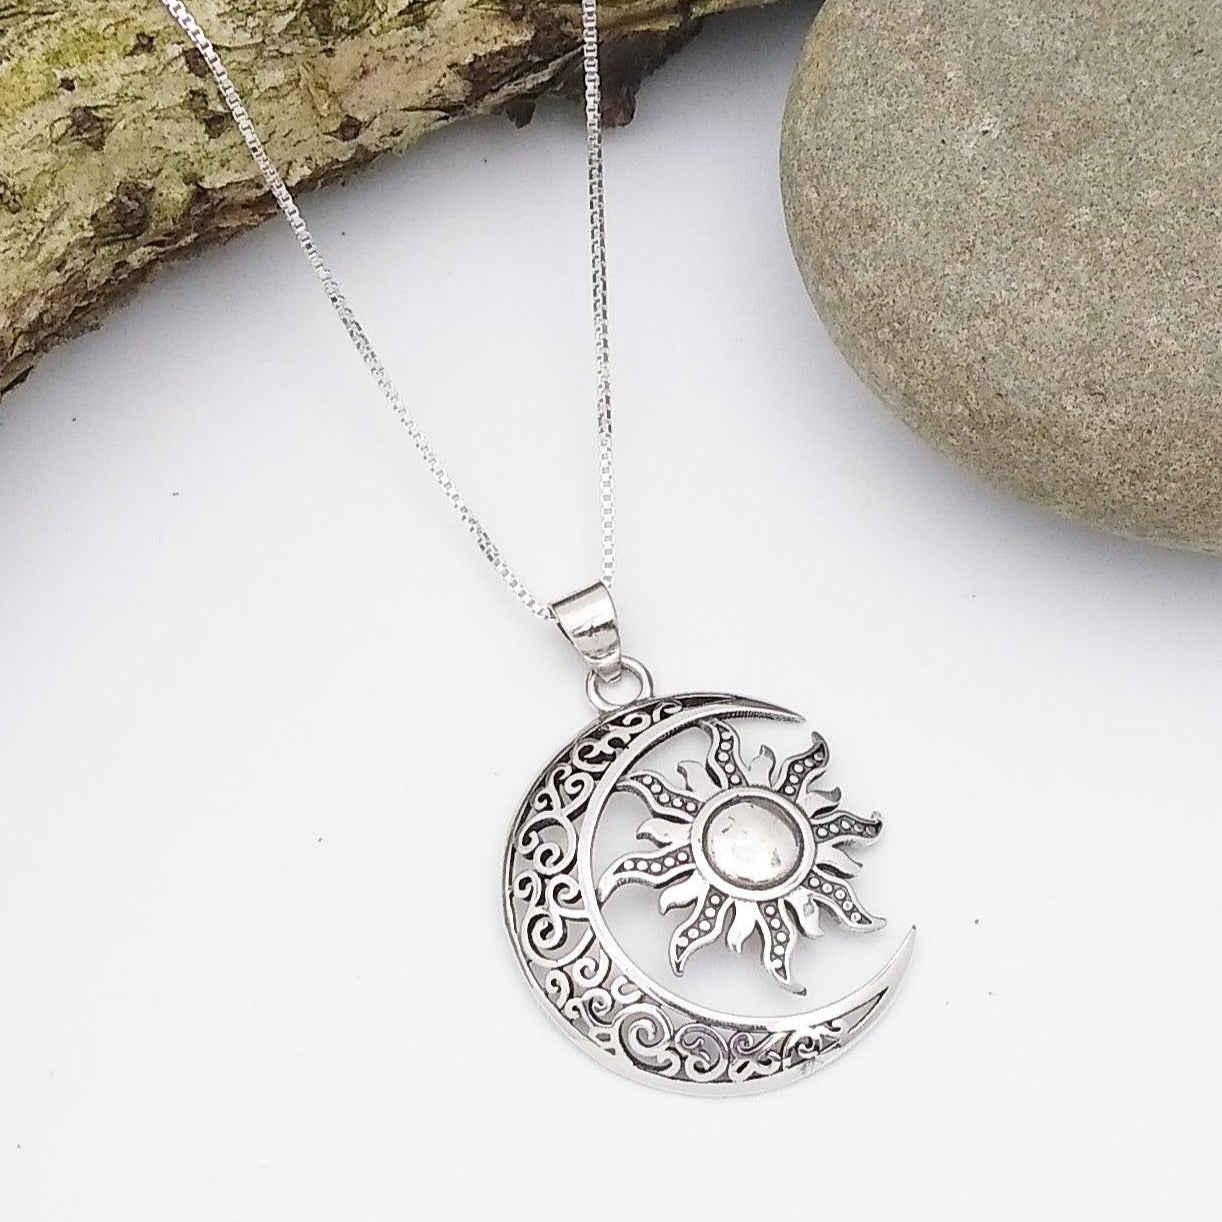 Sterling silver sun and moon pendant. The moon is a hollow crescent shape with simple designs in the metal work, and the sun has eight rays stretching out from the center with intricate designs in the metal.